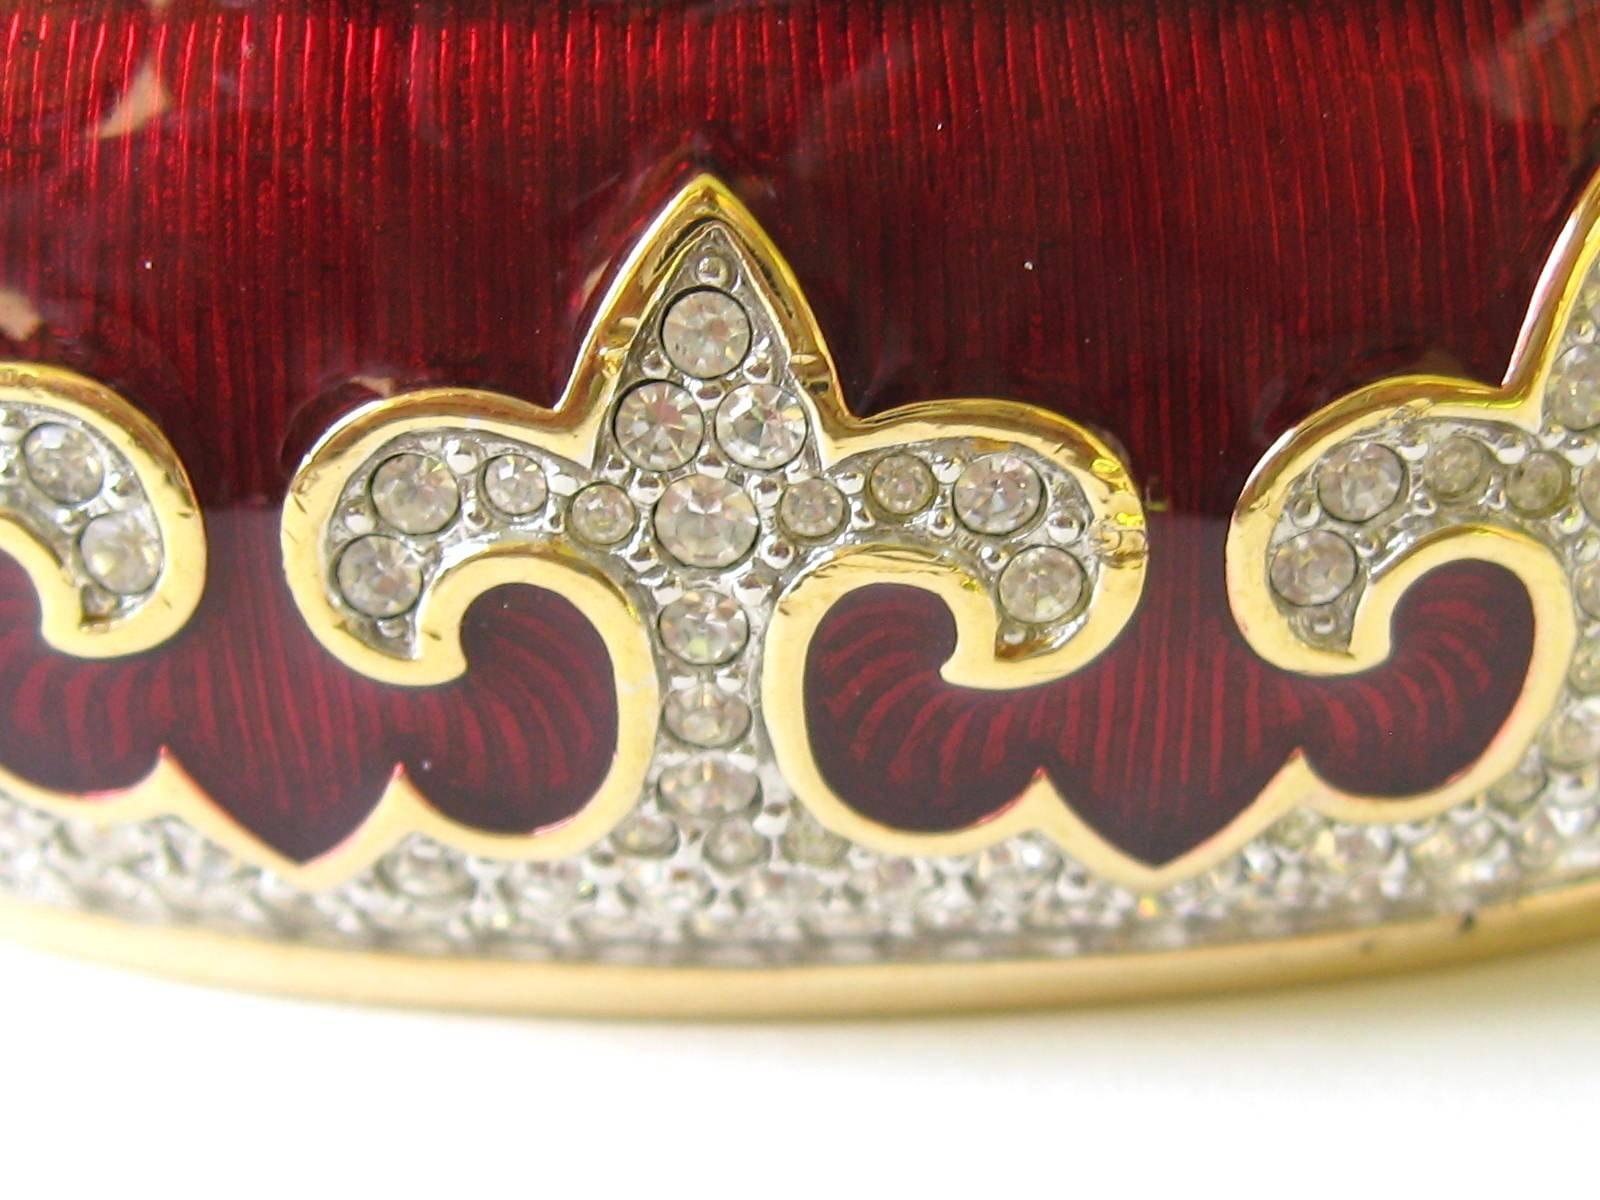 Heavy high quality Swarovski cuff bracelet with a deep glowing Red GUILLOCHE background and accented with crystal fleur de lis. The inside of the cuff is marked with the famous Swarovski Swan logo.  Swarovski made in the 1980s. Bracelet measures